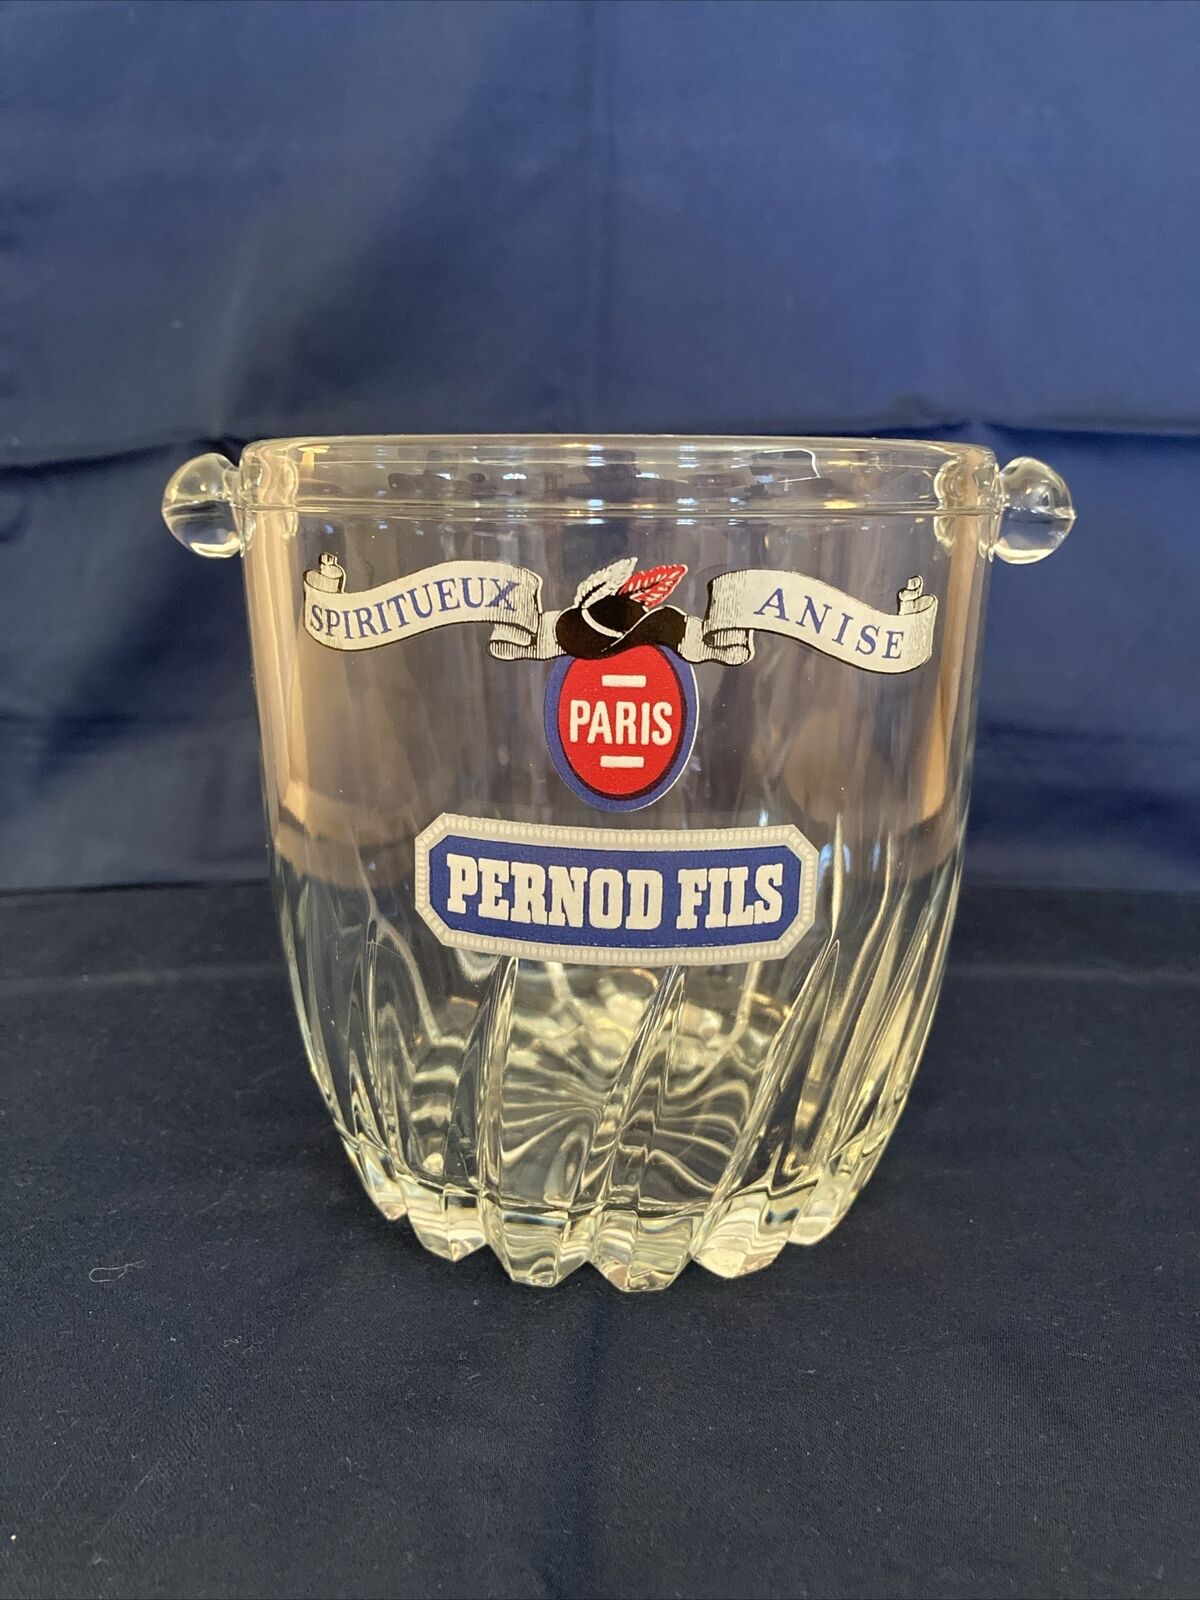 Pernod Fils Spiritueux Anise Crystal Ice Bucket Made in Paris France